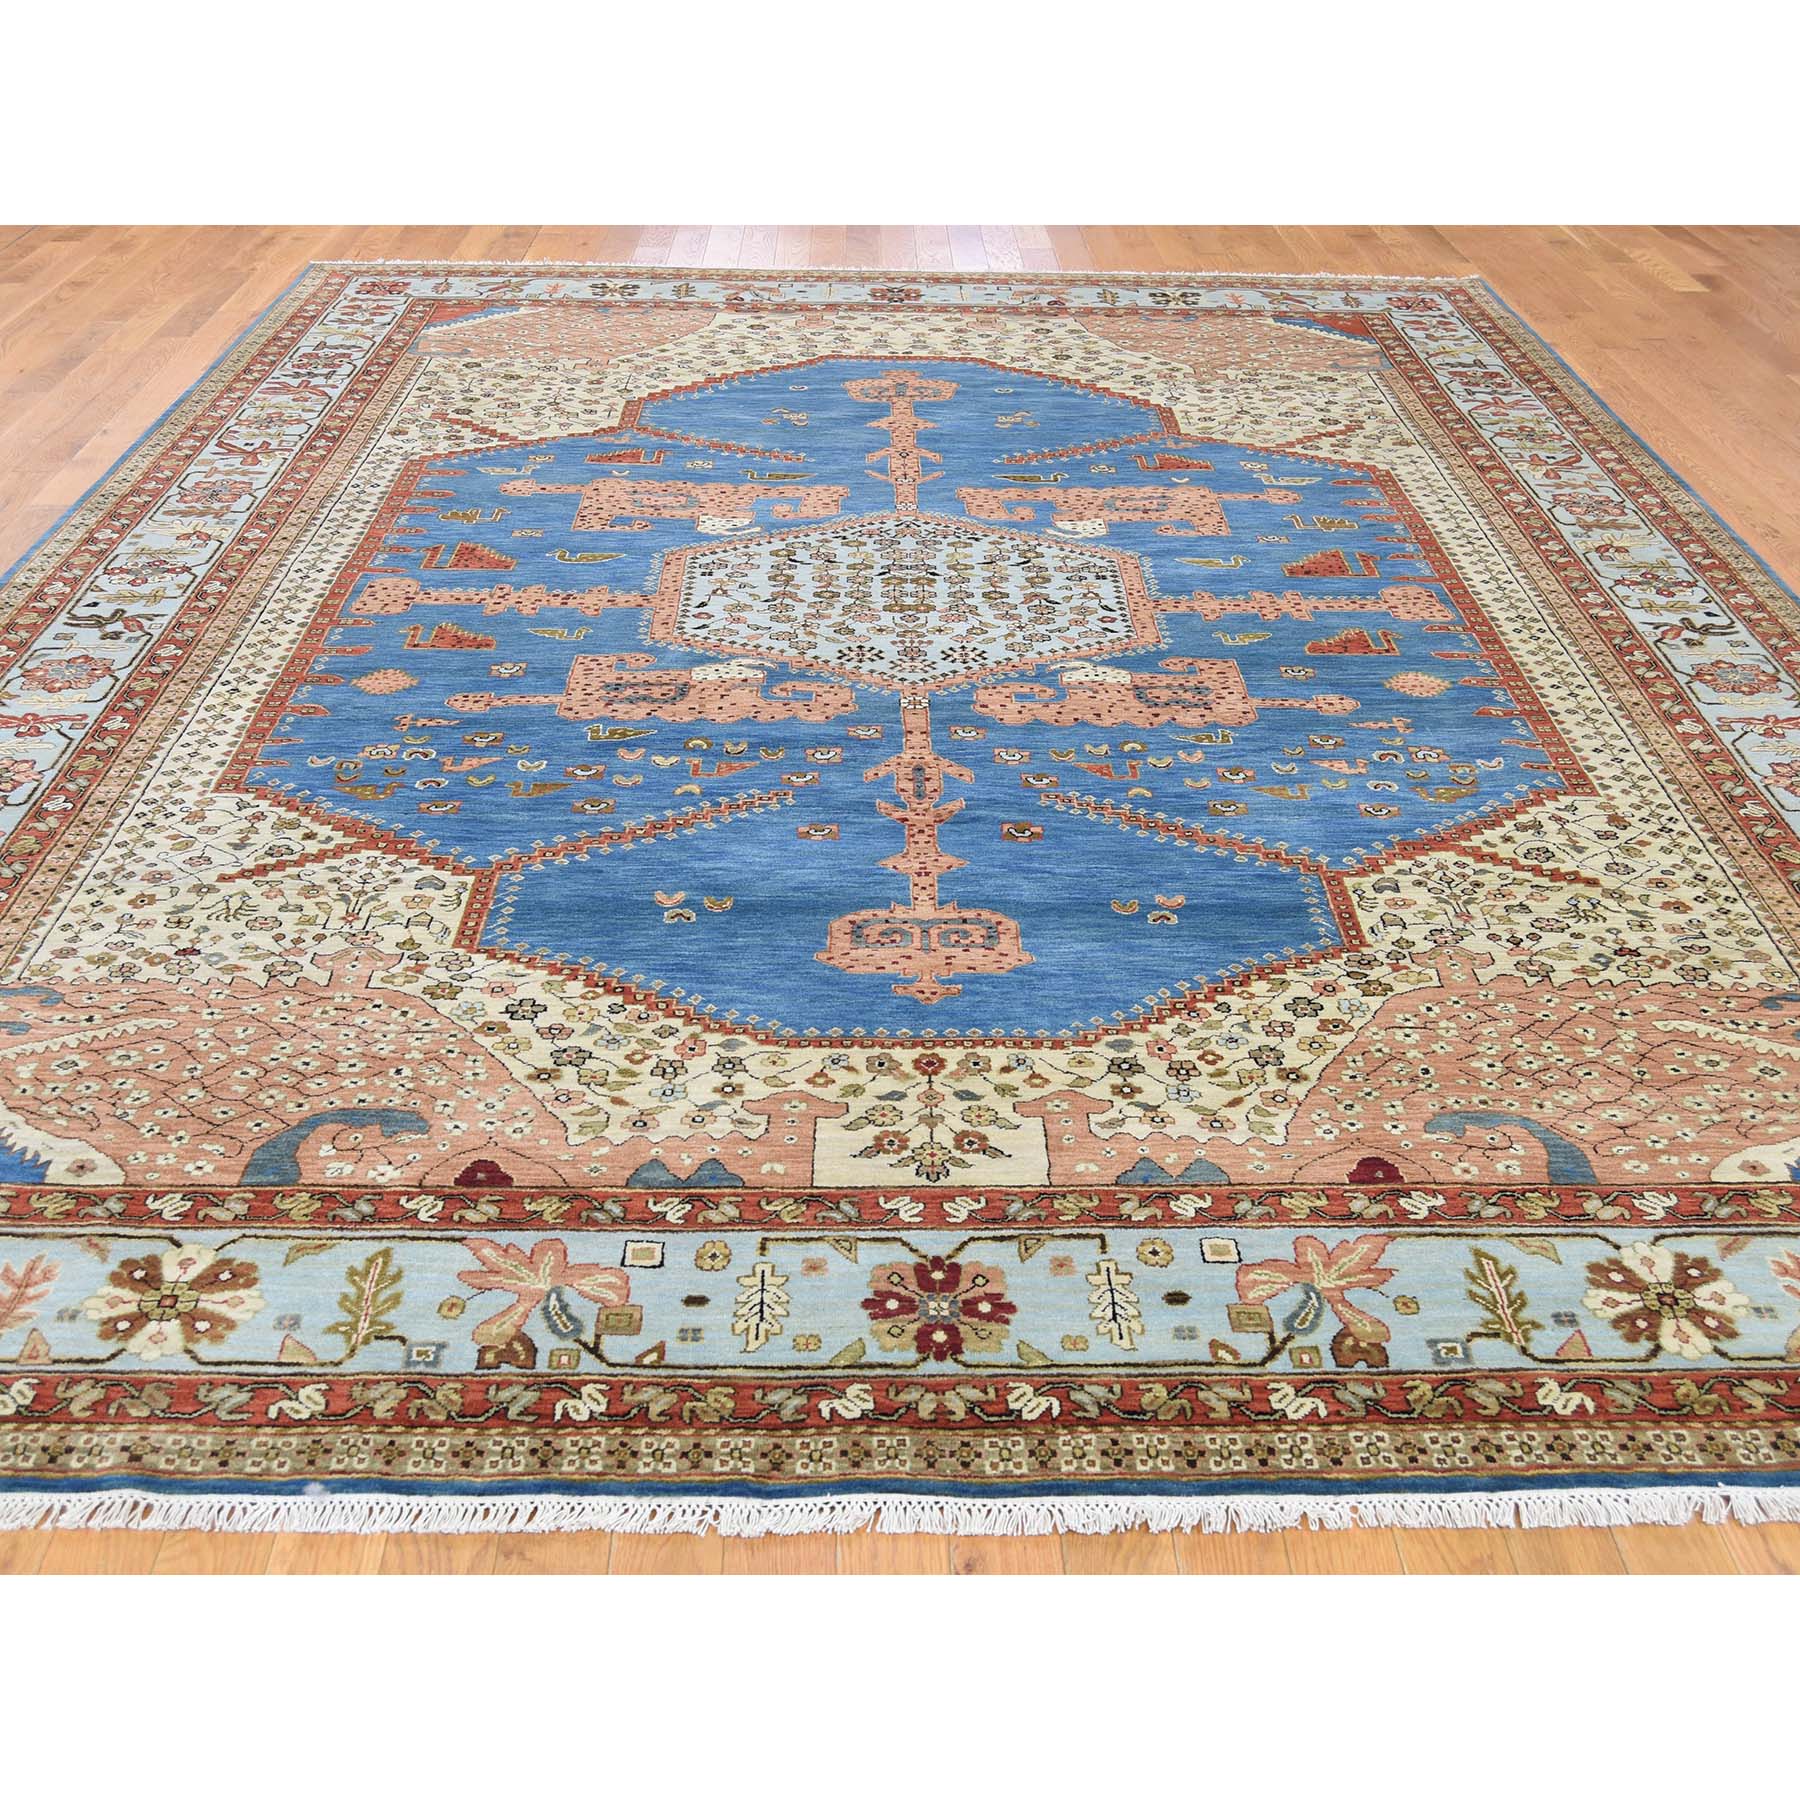 8-10 x12-1  Pure Wool Vegetable Dyes Bakshaish Hand-Knotted Oriental Rug 